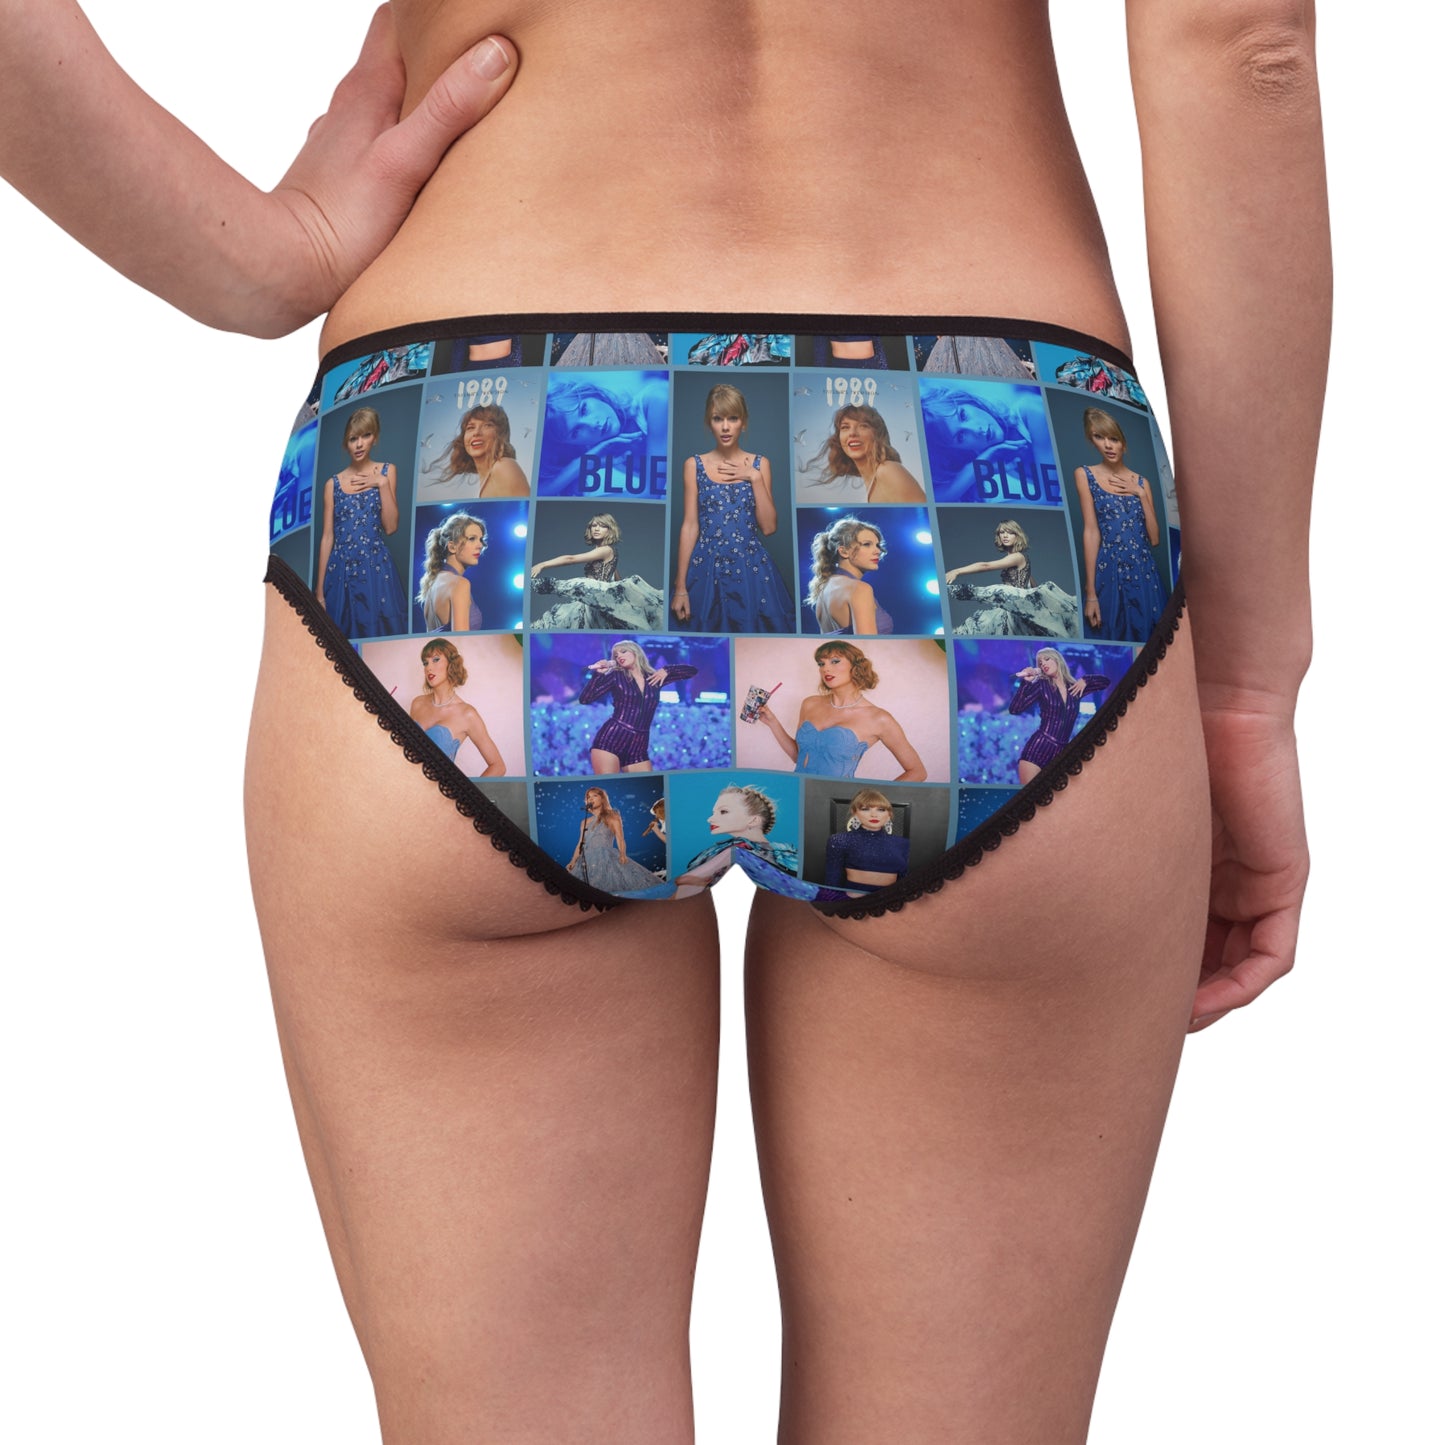 Taylor Swift Blue Aesthetic Collage Women's Briefs Panties